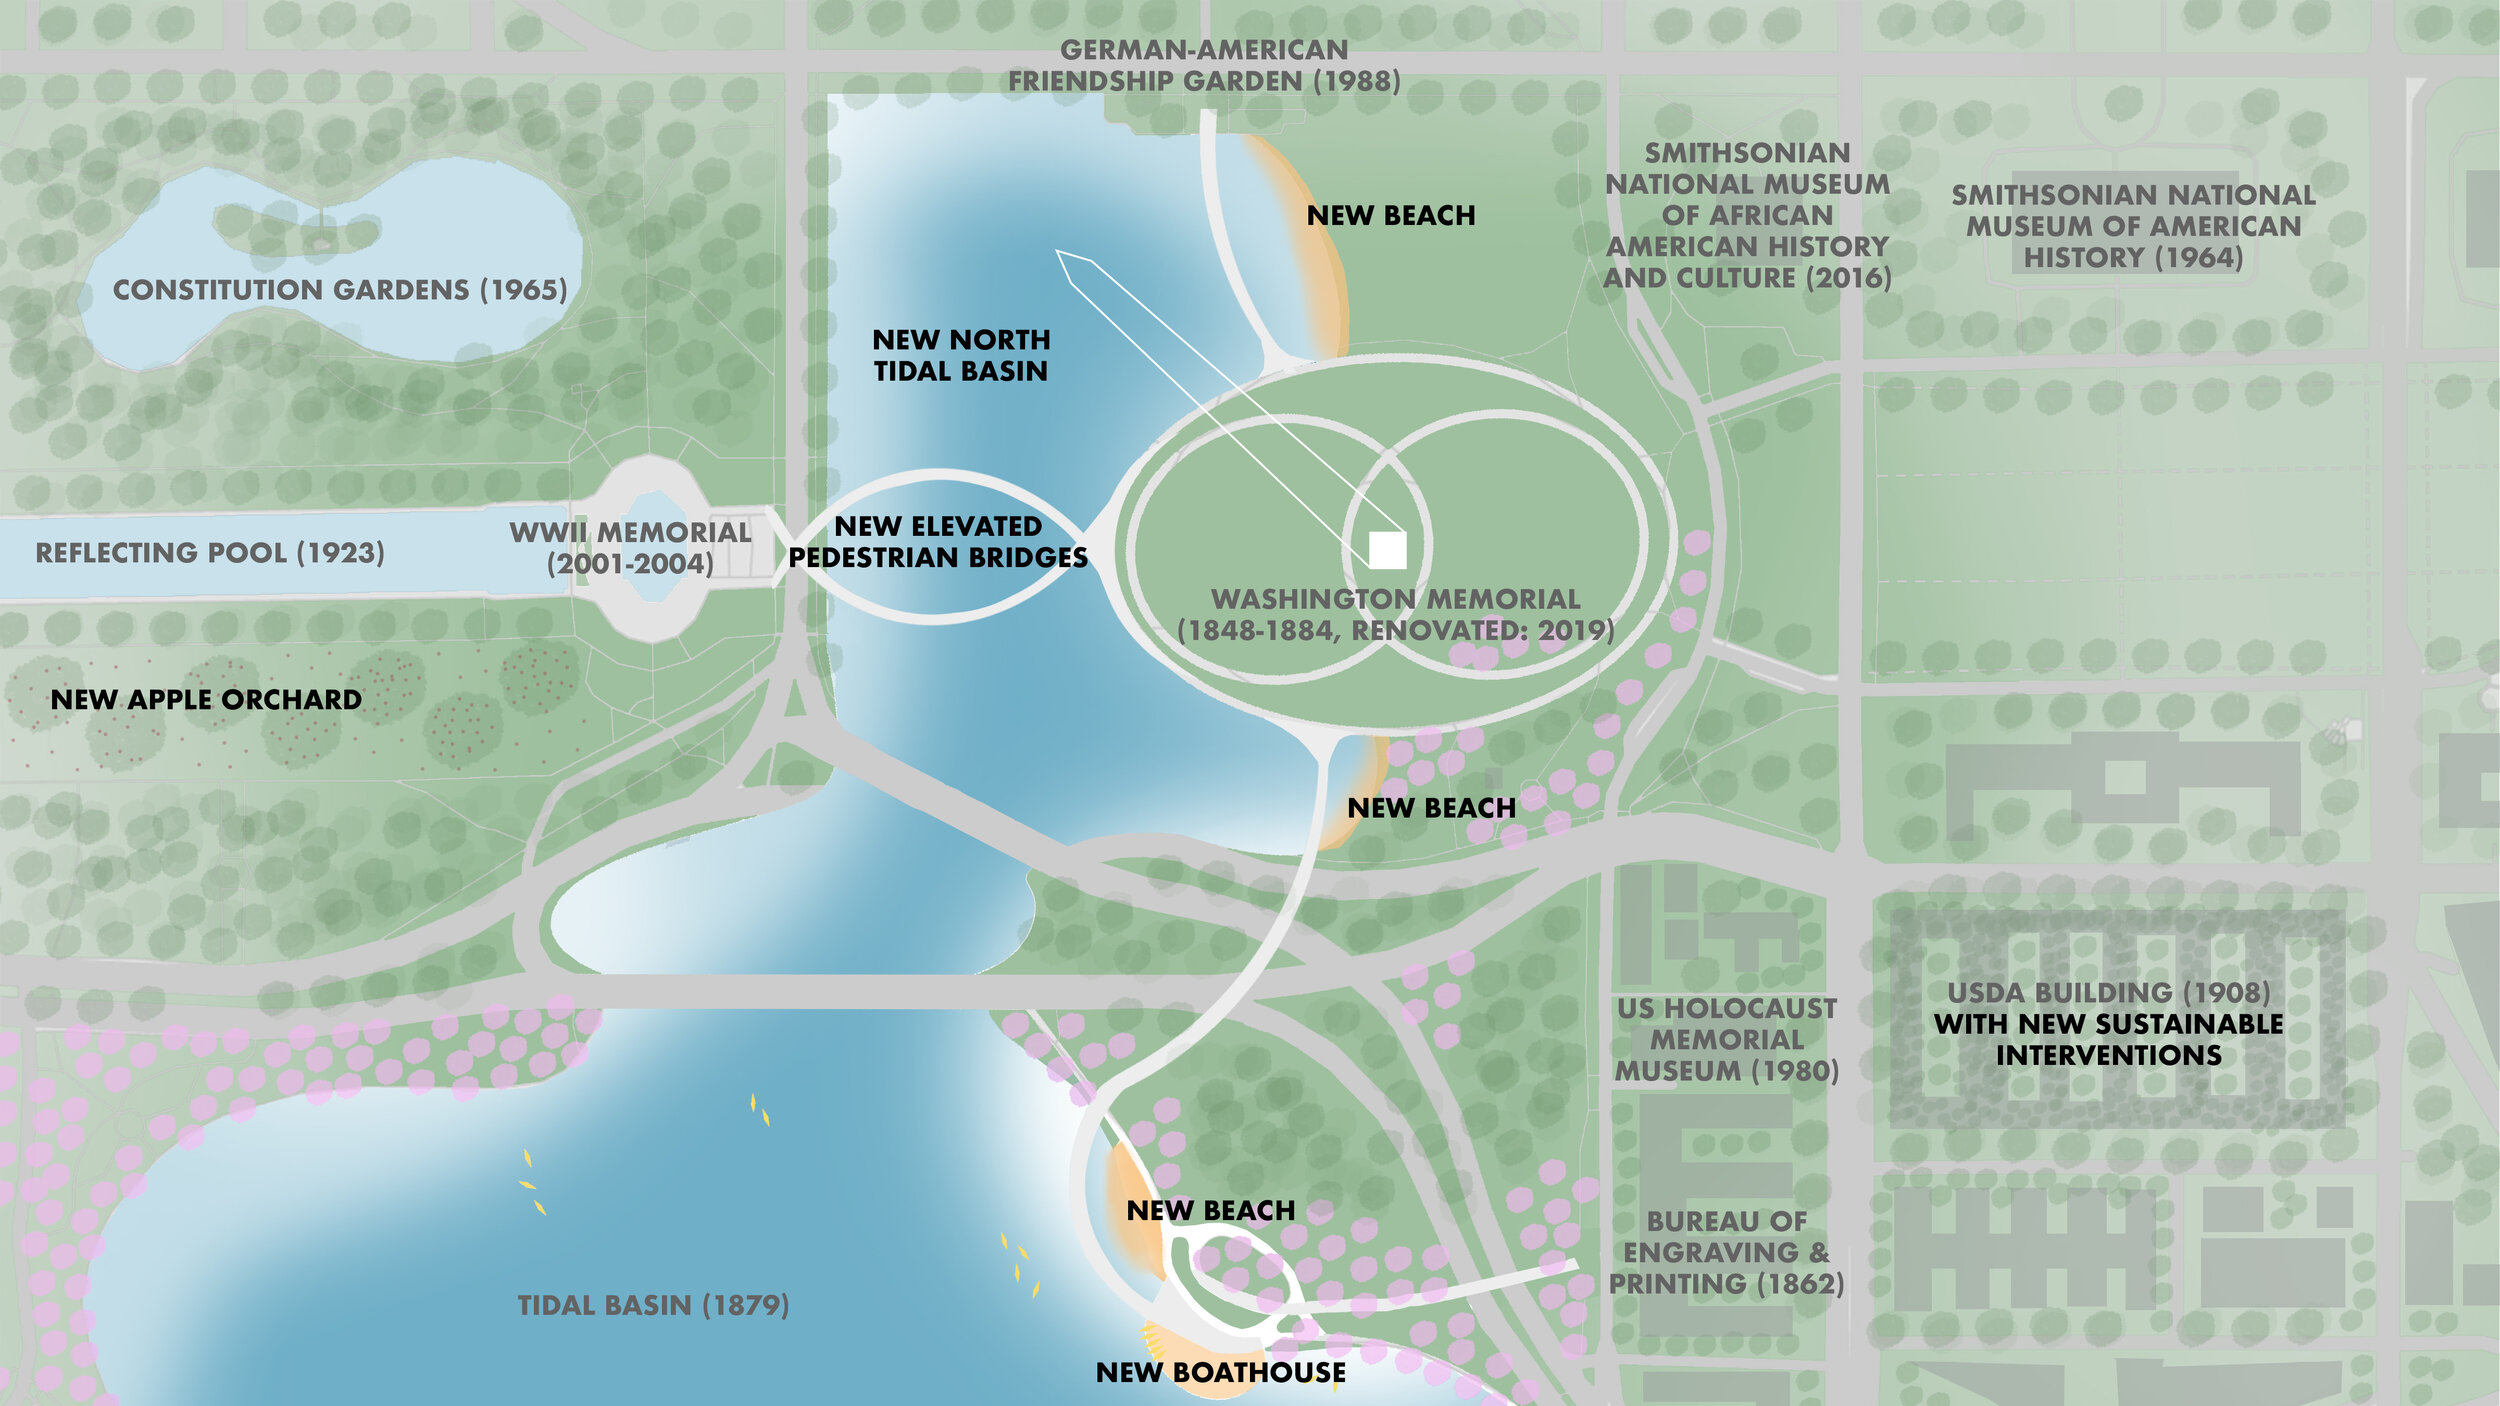  The New Tidal Basin expands into the Washington Memorial grounds to allow for more water retention. 